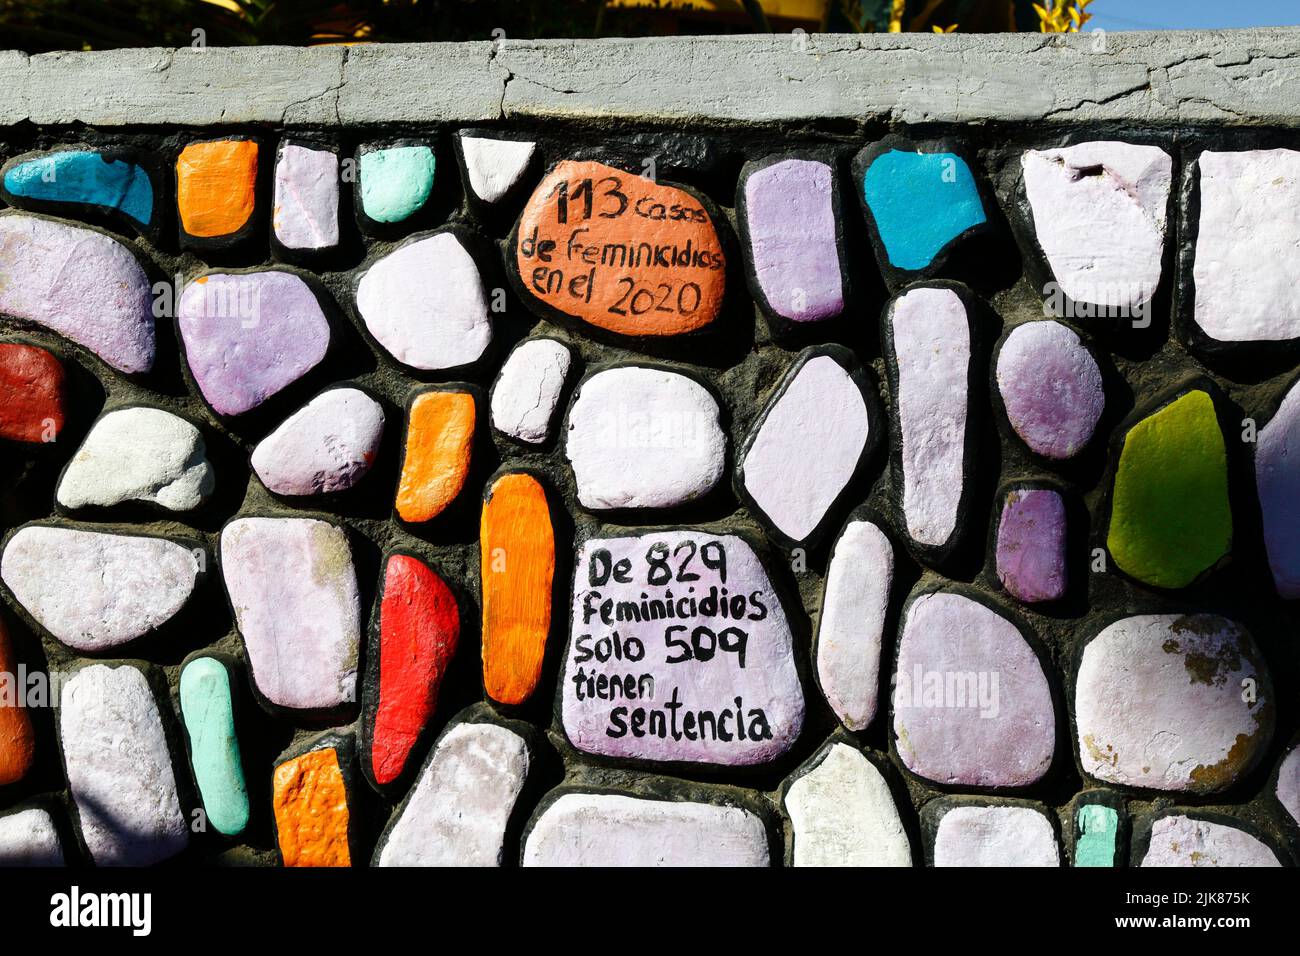 29th June 2022, Calacoto, La Paz, Bolivia. Detail of graffiti murals by feminist groups on a wall in La Paz's Zona Sur district protesting against violence against women, the number of femicides and slowness of the justice system in dealing with cases. Stock Photo